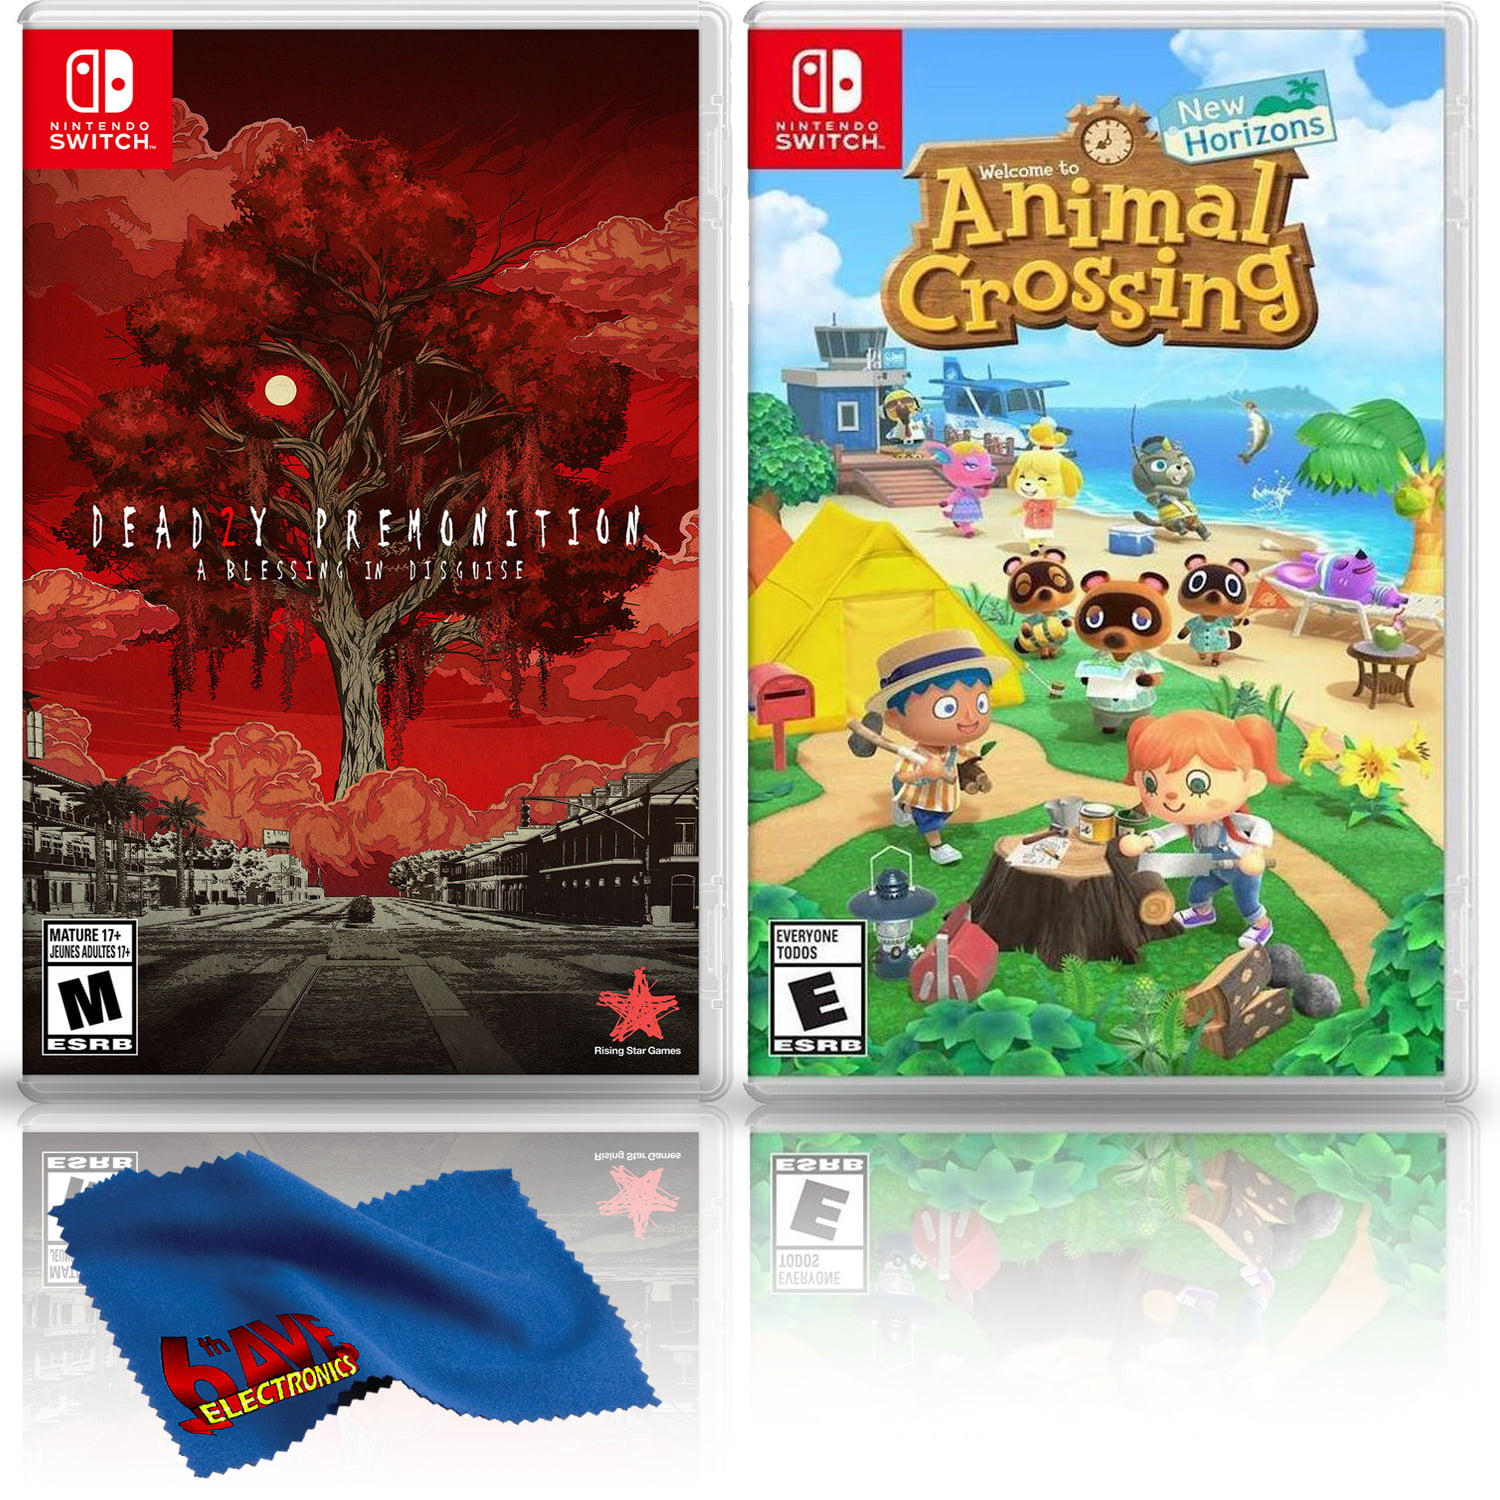 Deadly Premonition 2 A Blessing In Disguise Animal Crossing New Horizons Two Game Bundle Nintendo Switch Walmart Com Walmart Com - 100 free untouched roblox accounts for sale